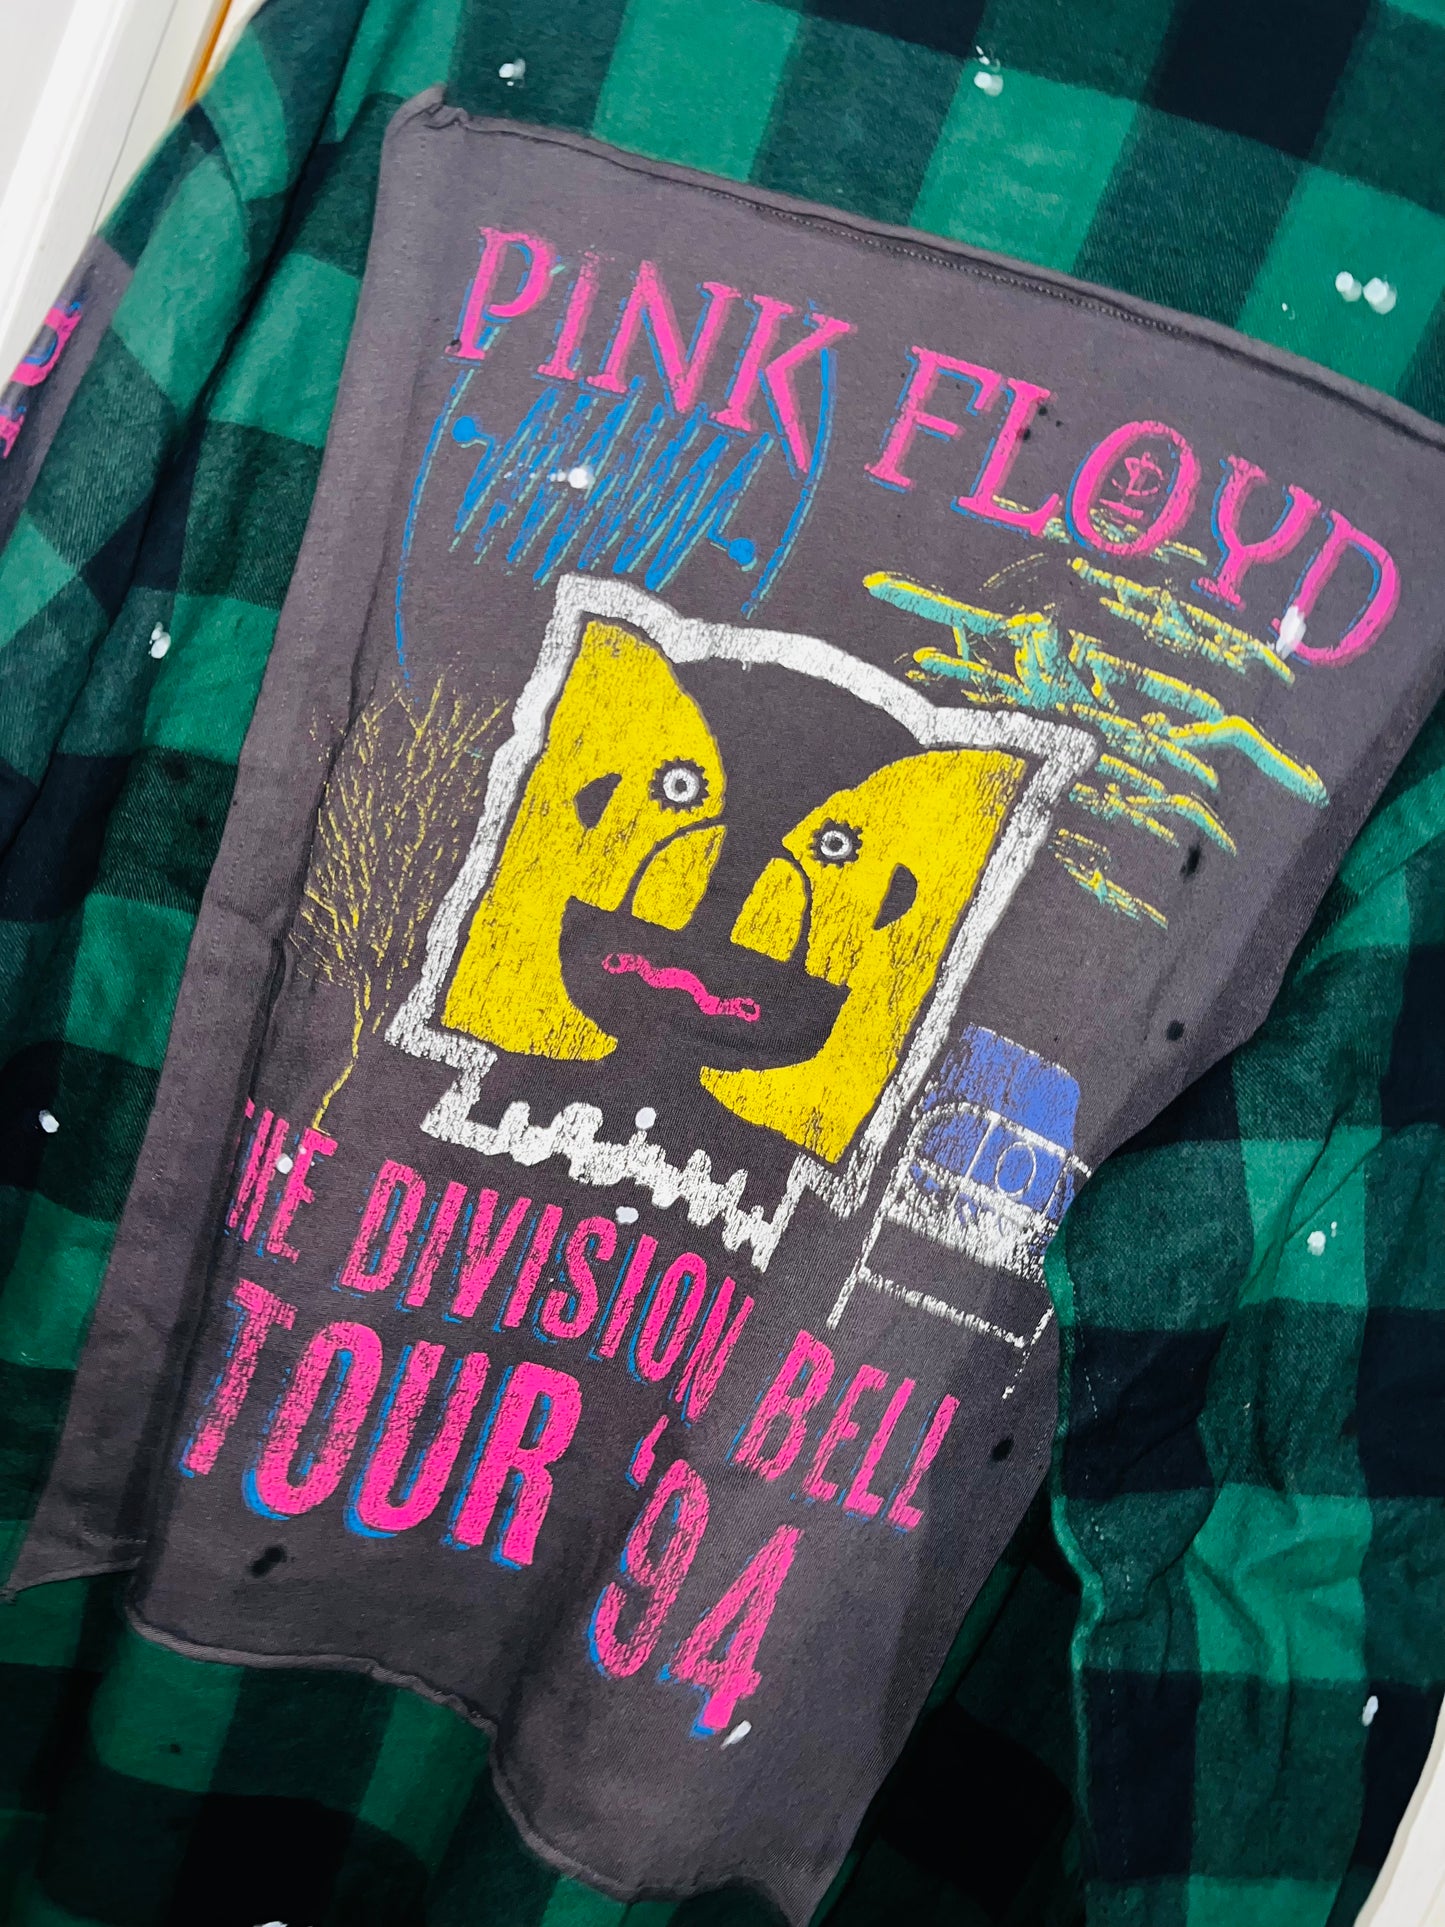 Pink Floyd Flannel 94 Tour with Back Patches/Patches